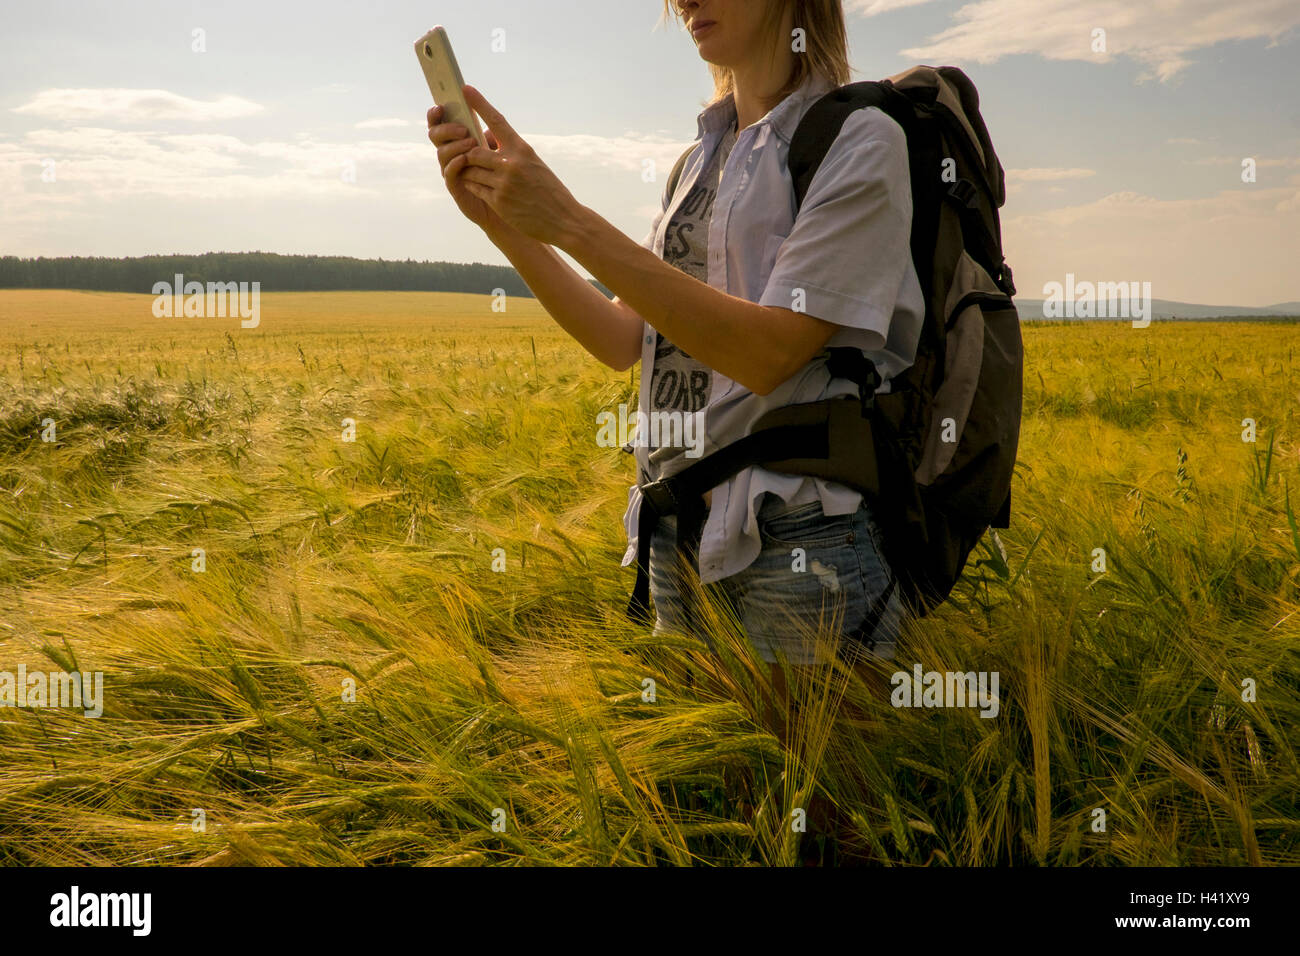 Caucasian woman standing in field using cell phone Banque D'Images